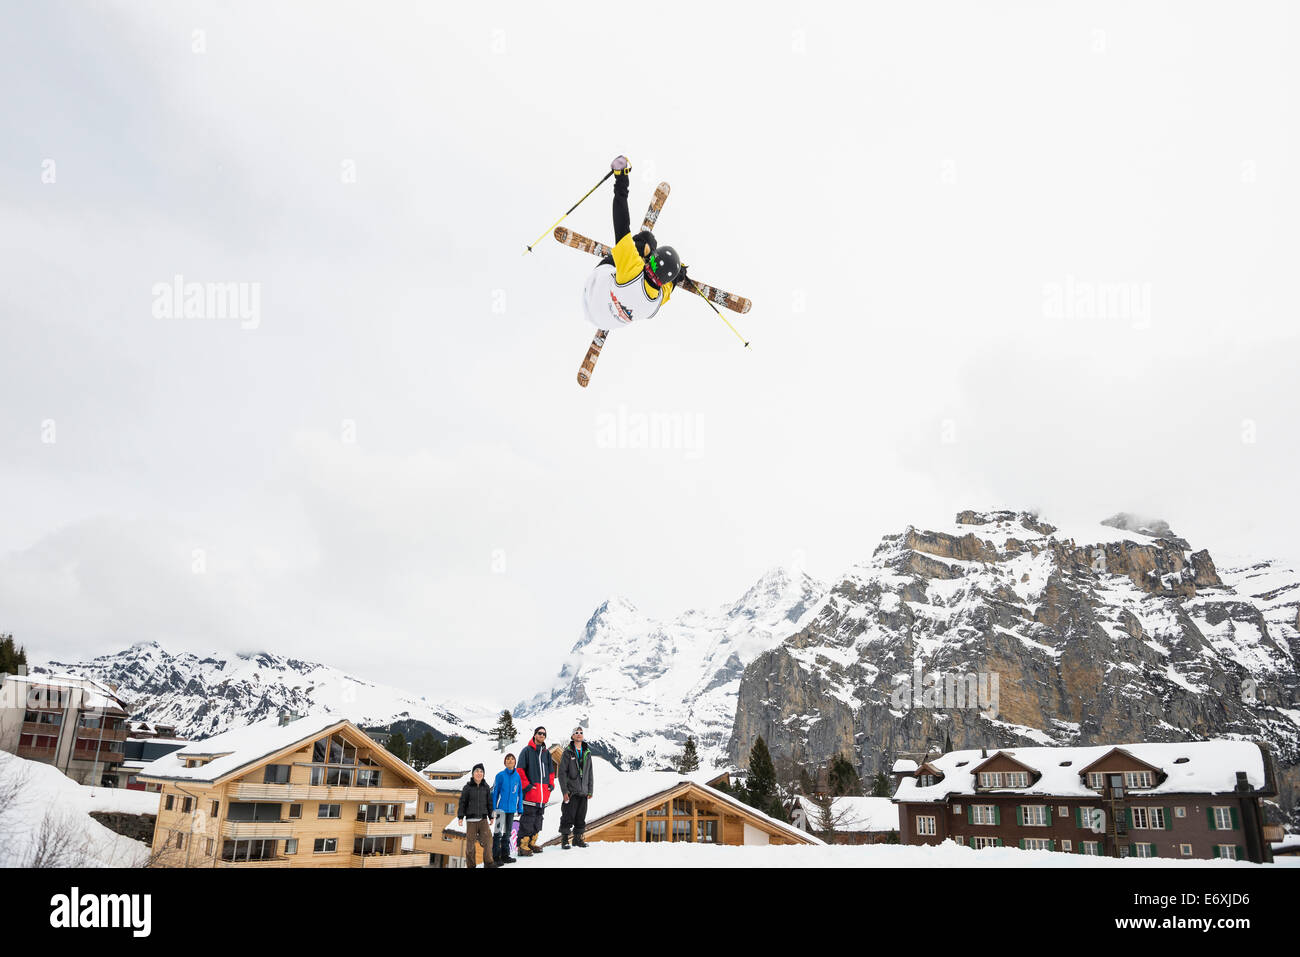 Freestyle skier in action, whitestyle open, freestyle competition, Muerren, canton of Bern, Switzerland Stock Photo